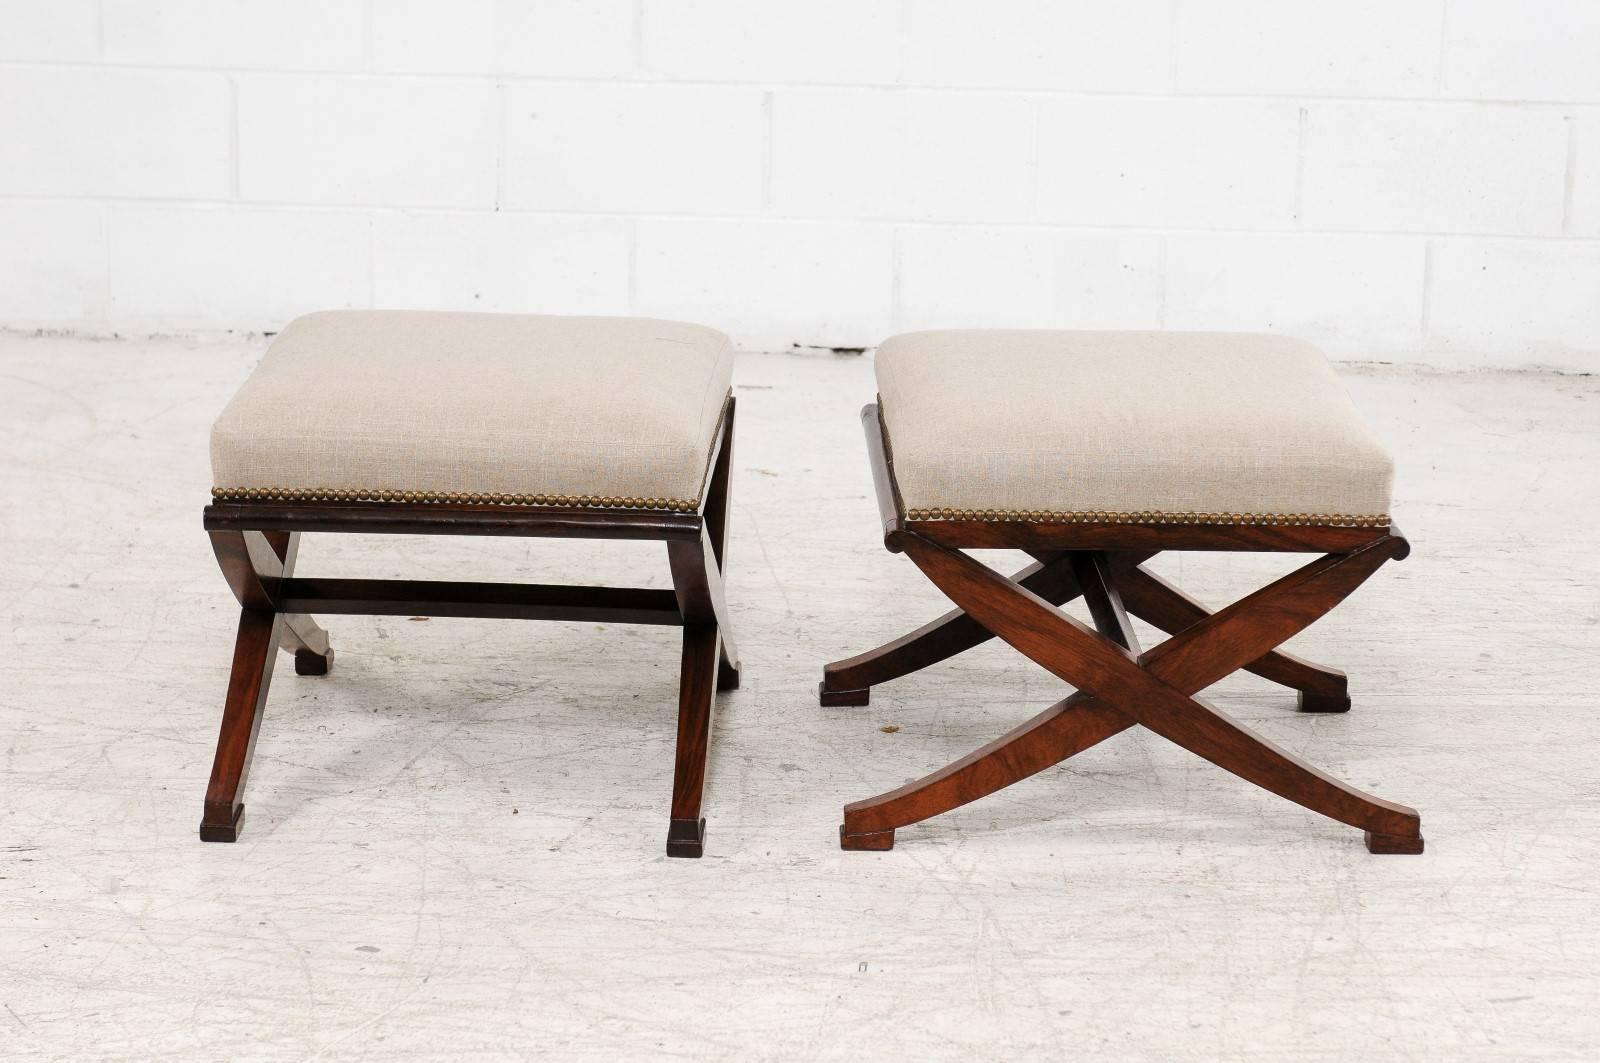 Pair of French Mahogany X-Form Stools, circa 1870 with Newly Upholstered Seats 1